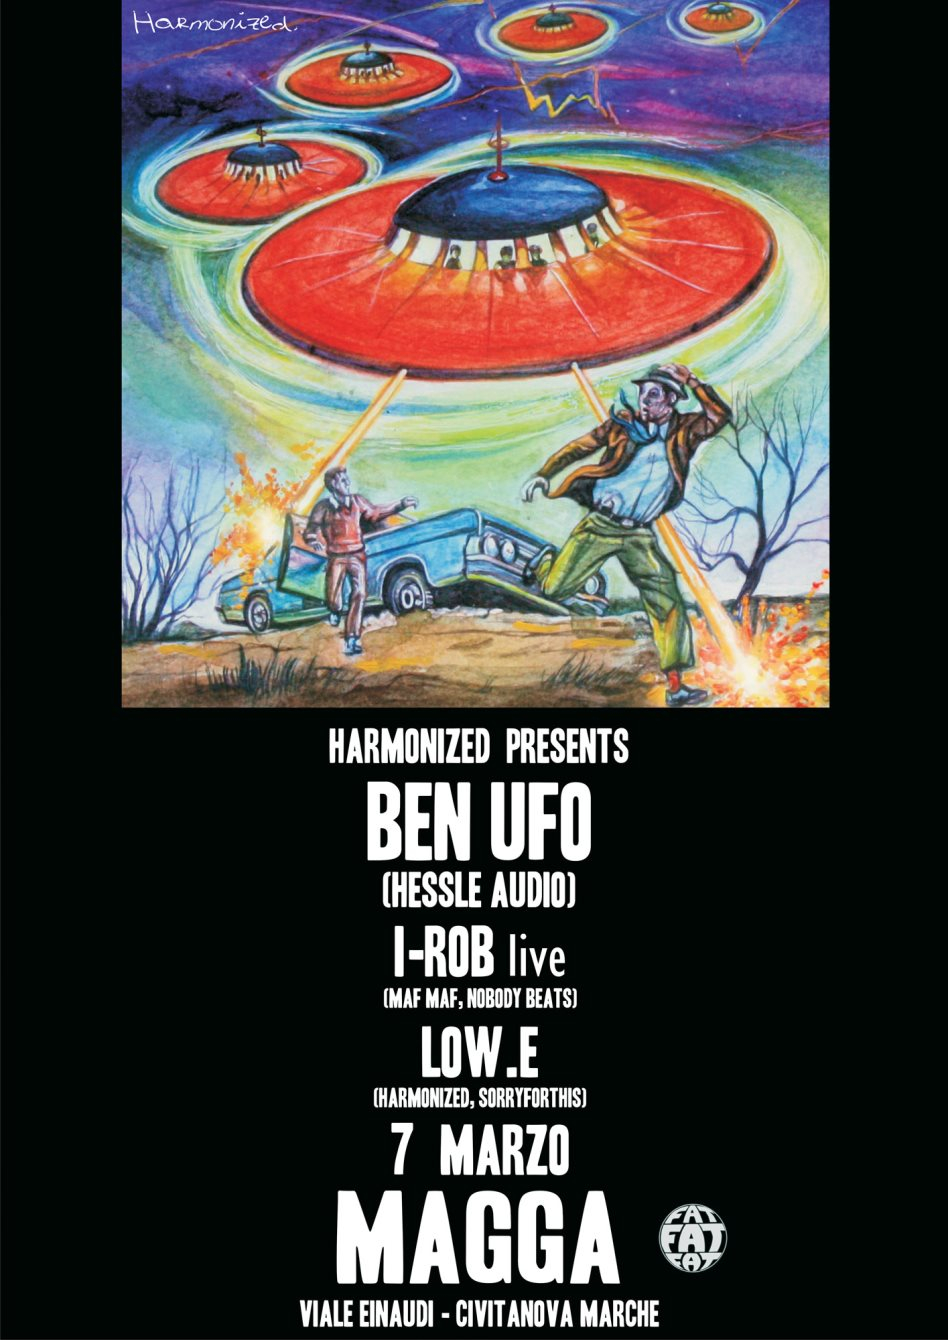 Harmonized with Ben Ufo, I-Rob (Live), Low.e - Flyer front